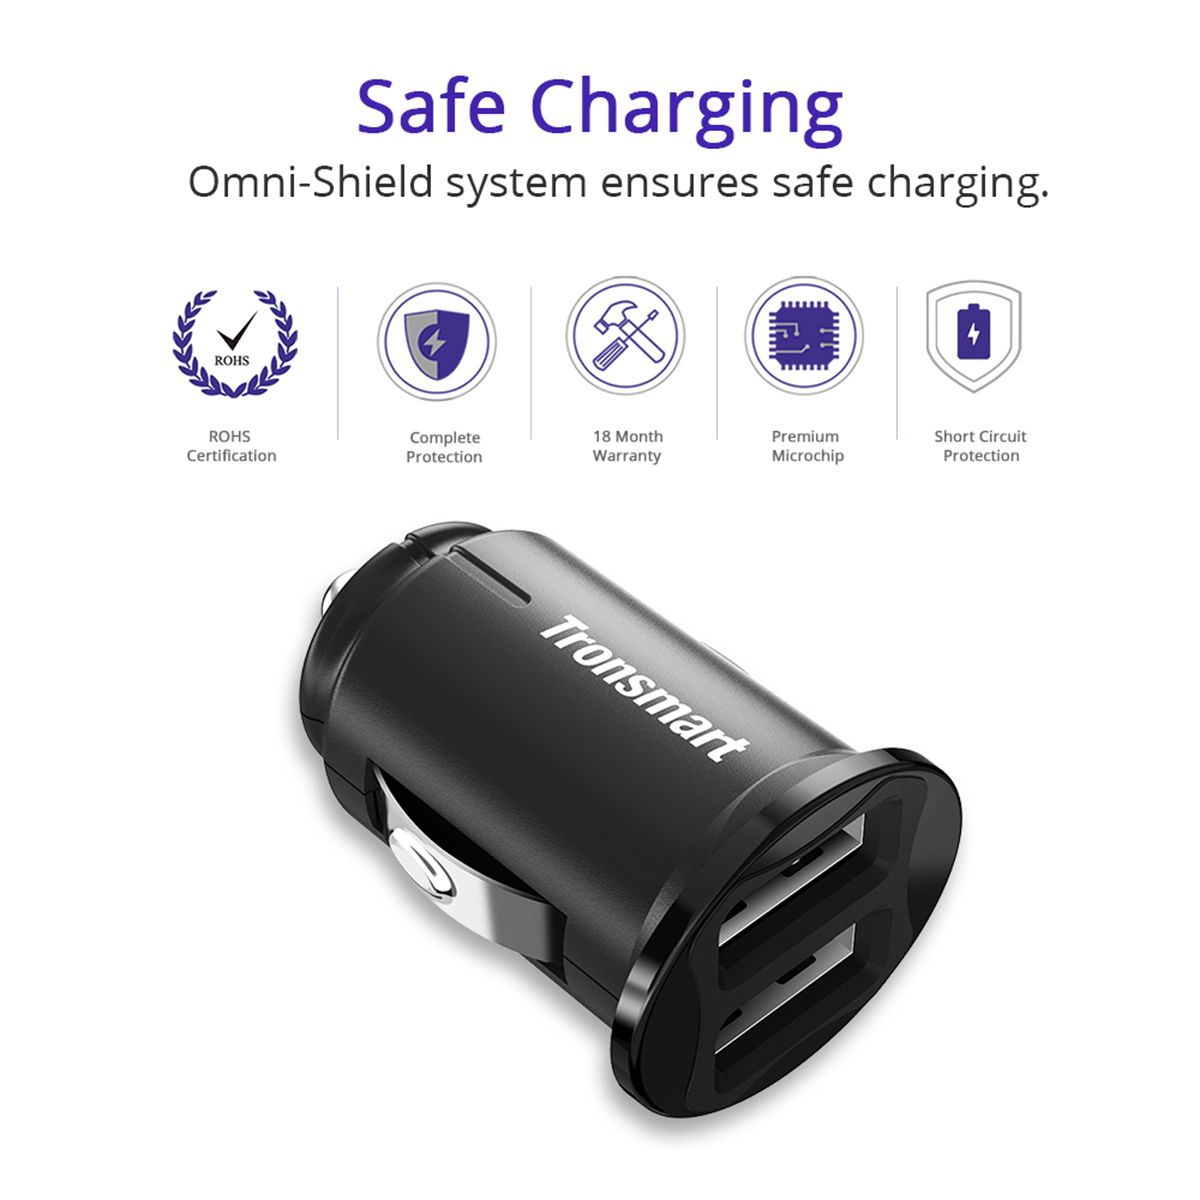 Tronsmart-C24-Dual-USB-Port-1224V-Car-Charger-Power-Adapter-for-iPhone-1361795